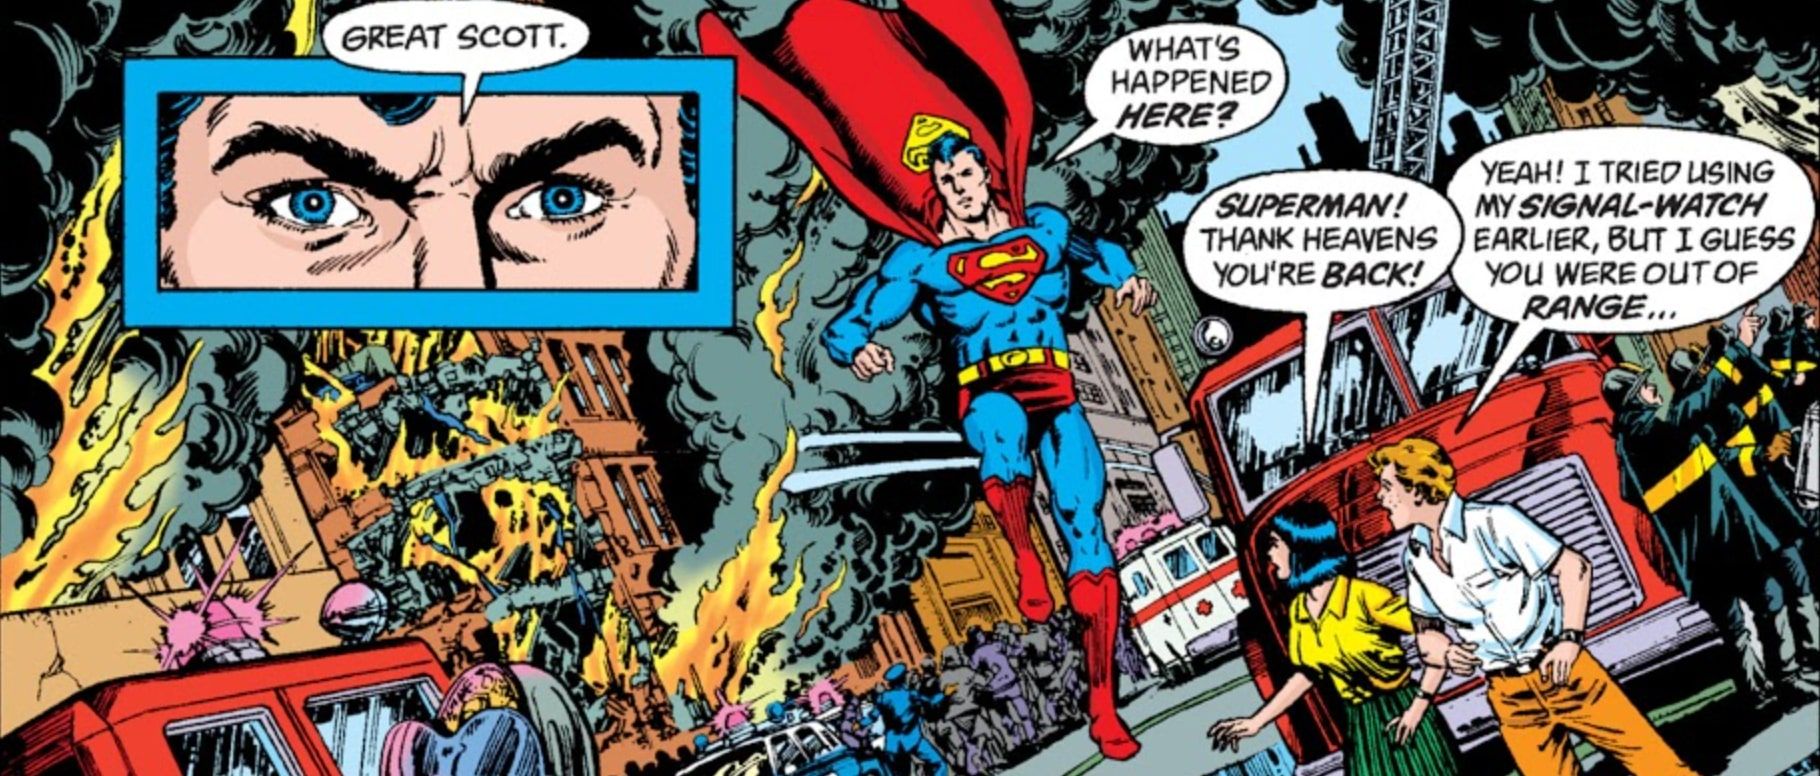 Superman flies in to discover Metropolis in chaos